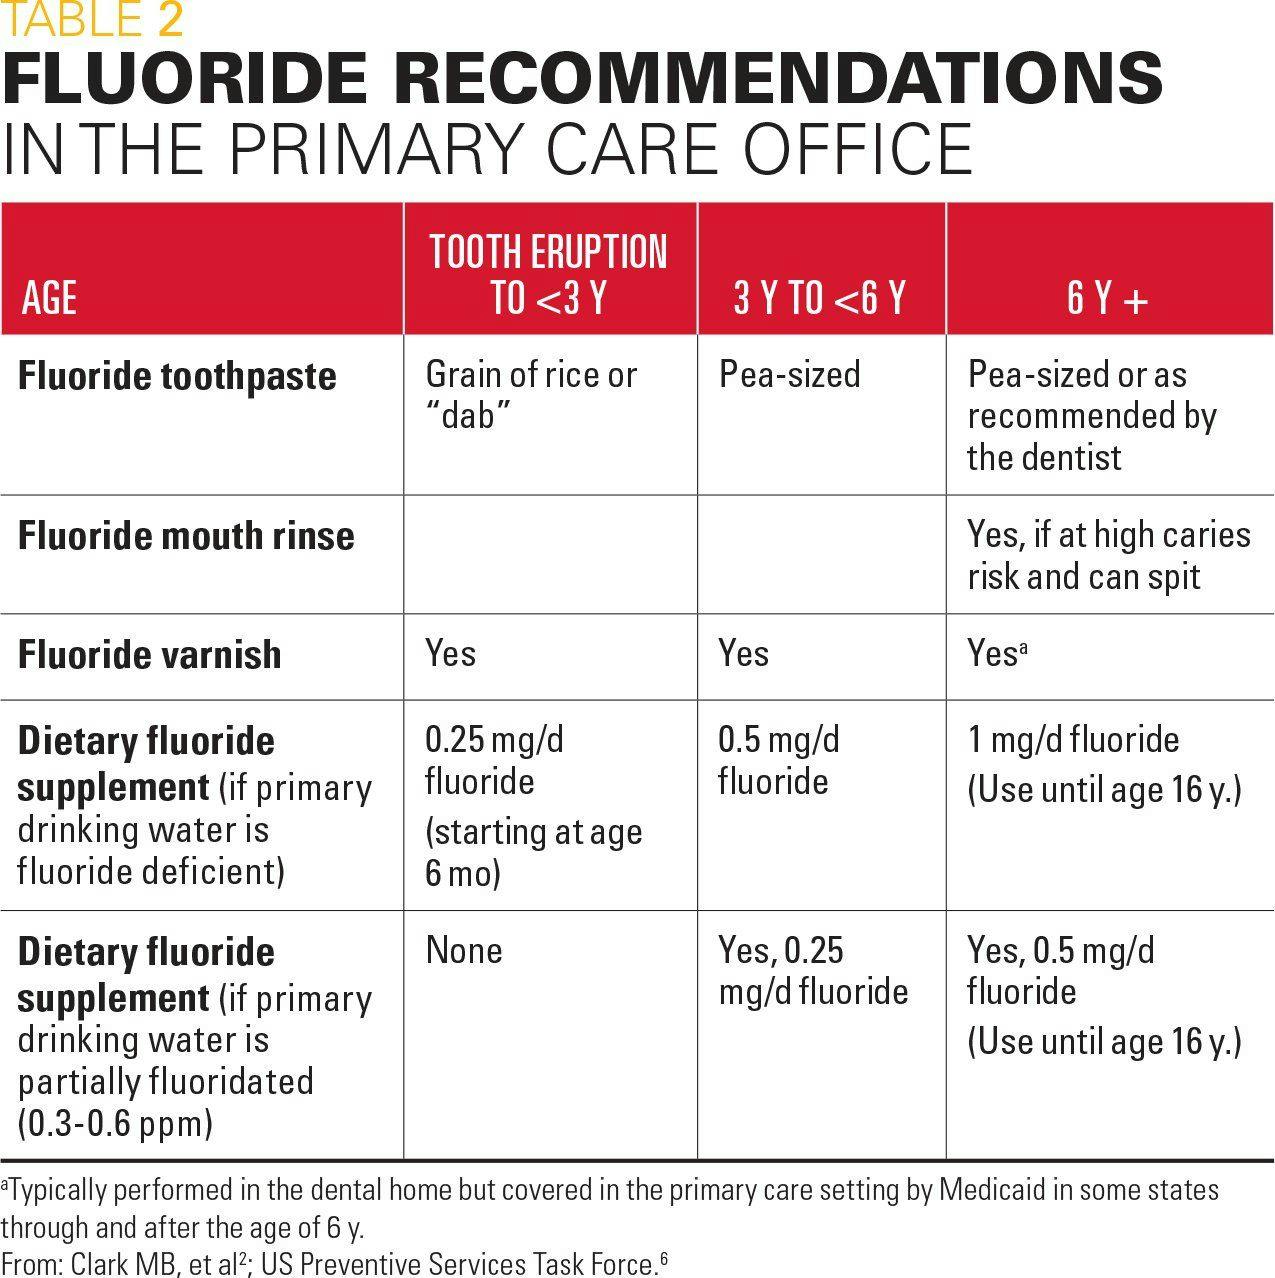 Fluoride recommendations in the primary care office